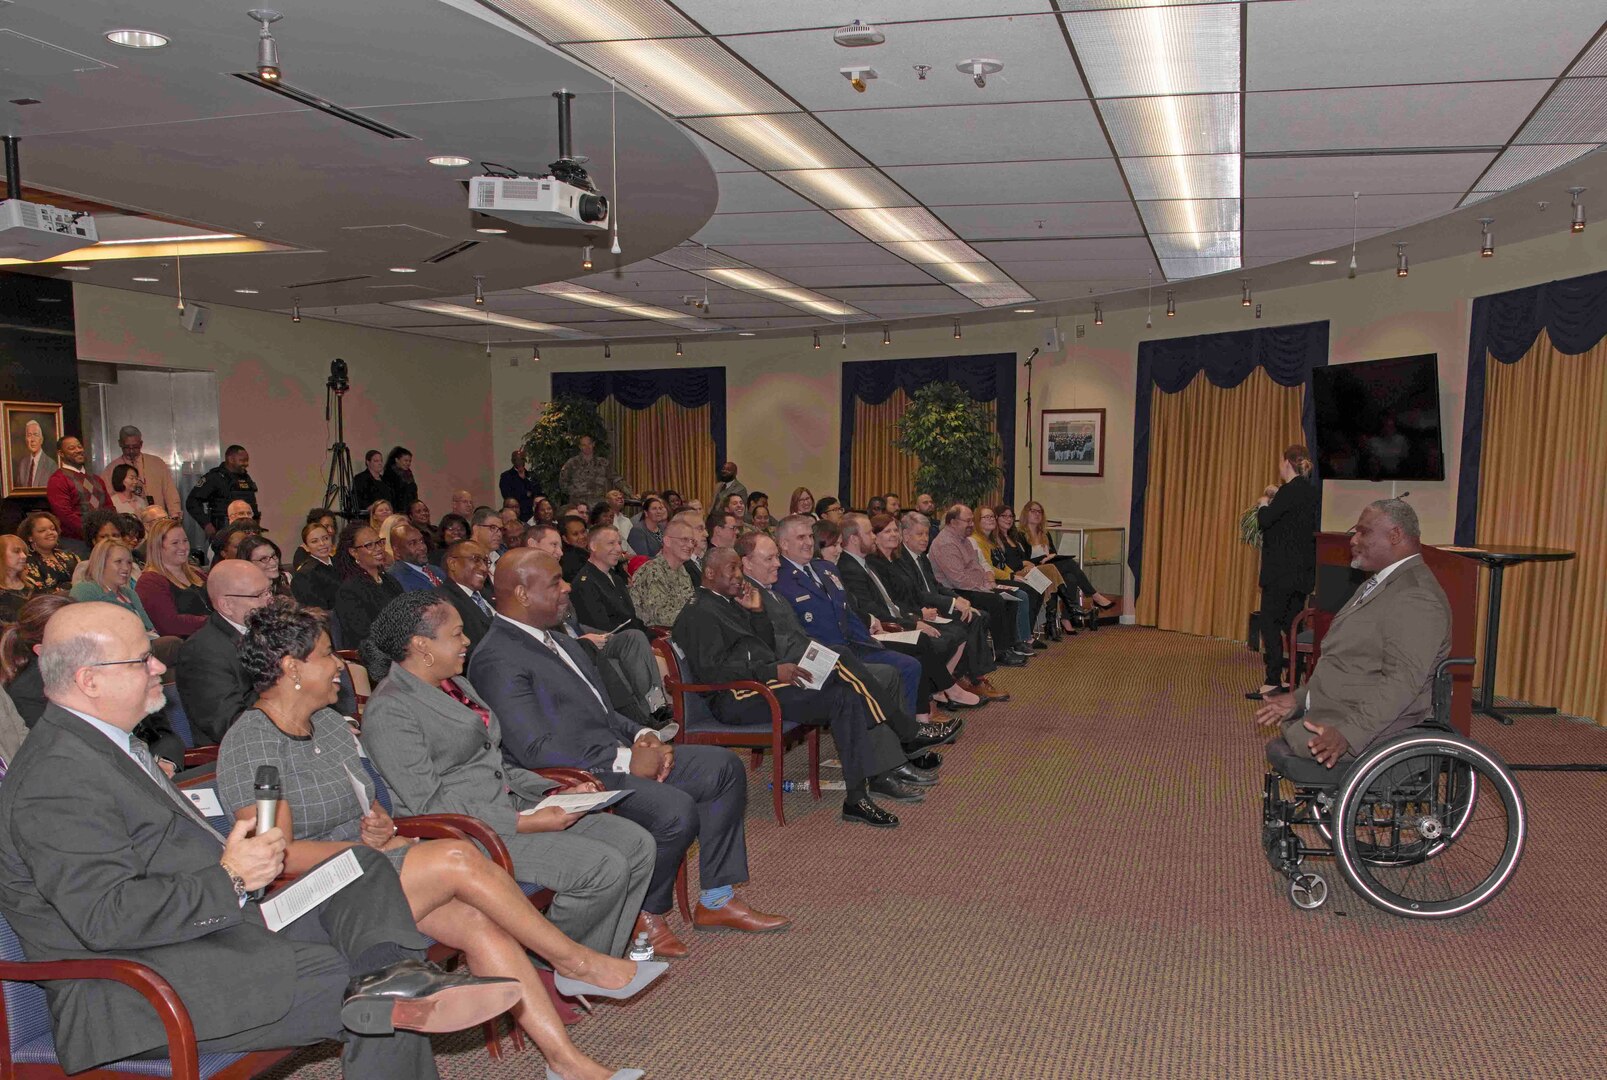 Retired Army Col. Gregory D. Gadson, a bilateral above-the-knee amputee, speaks to DLA employees.